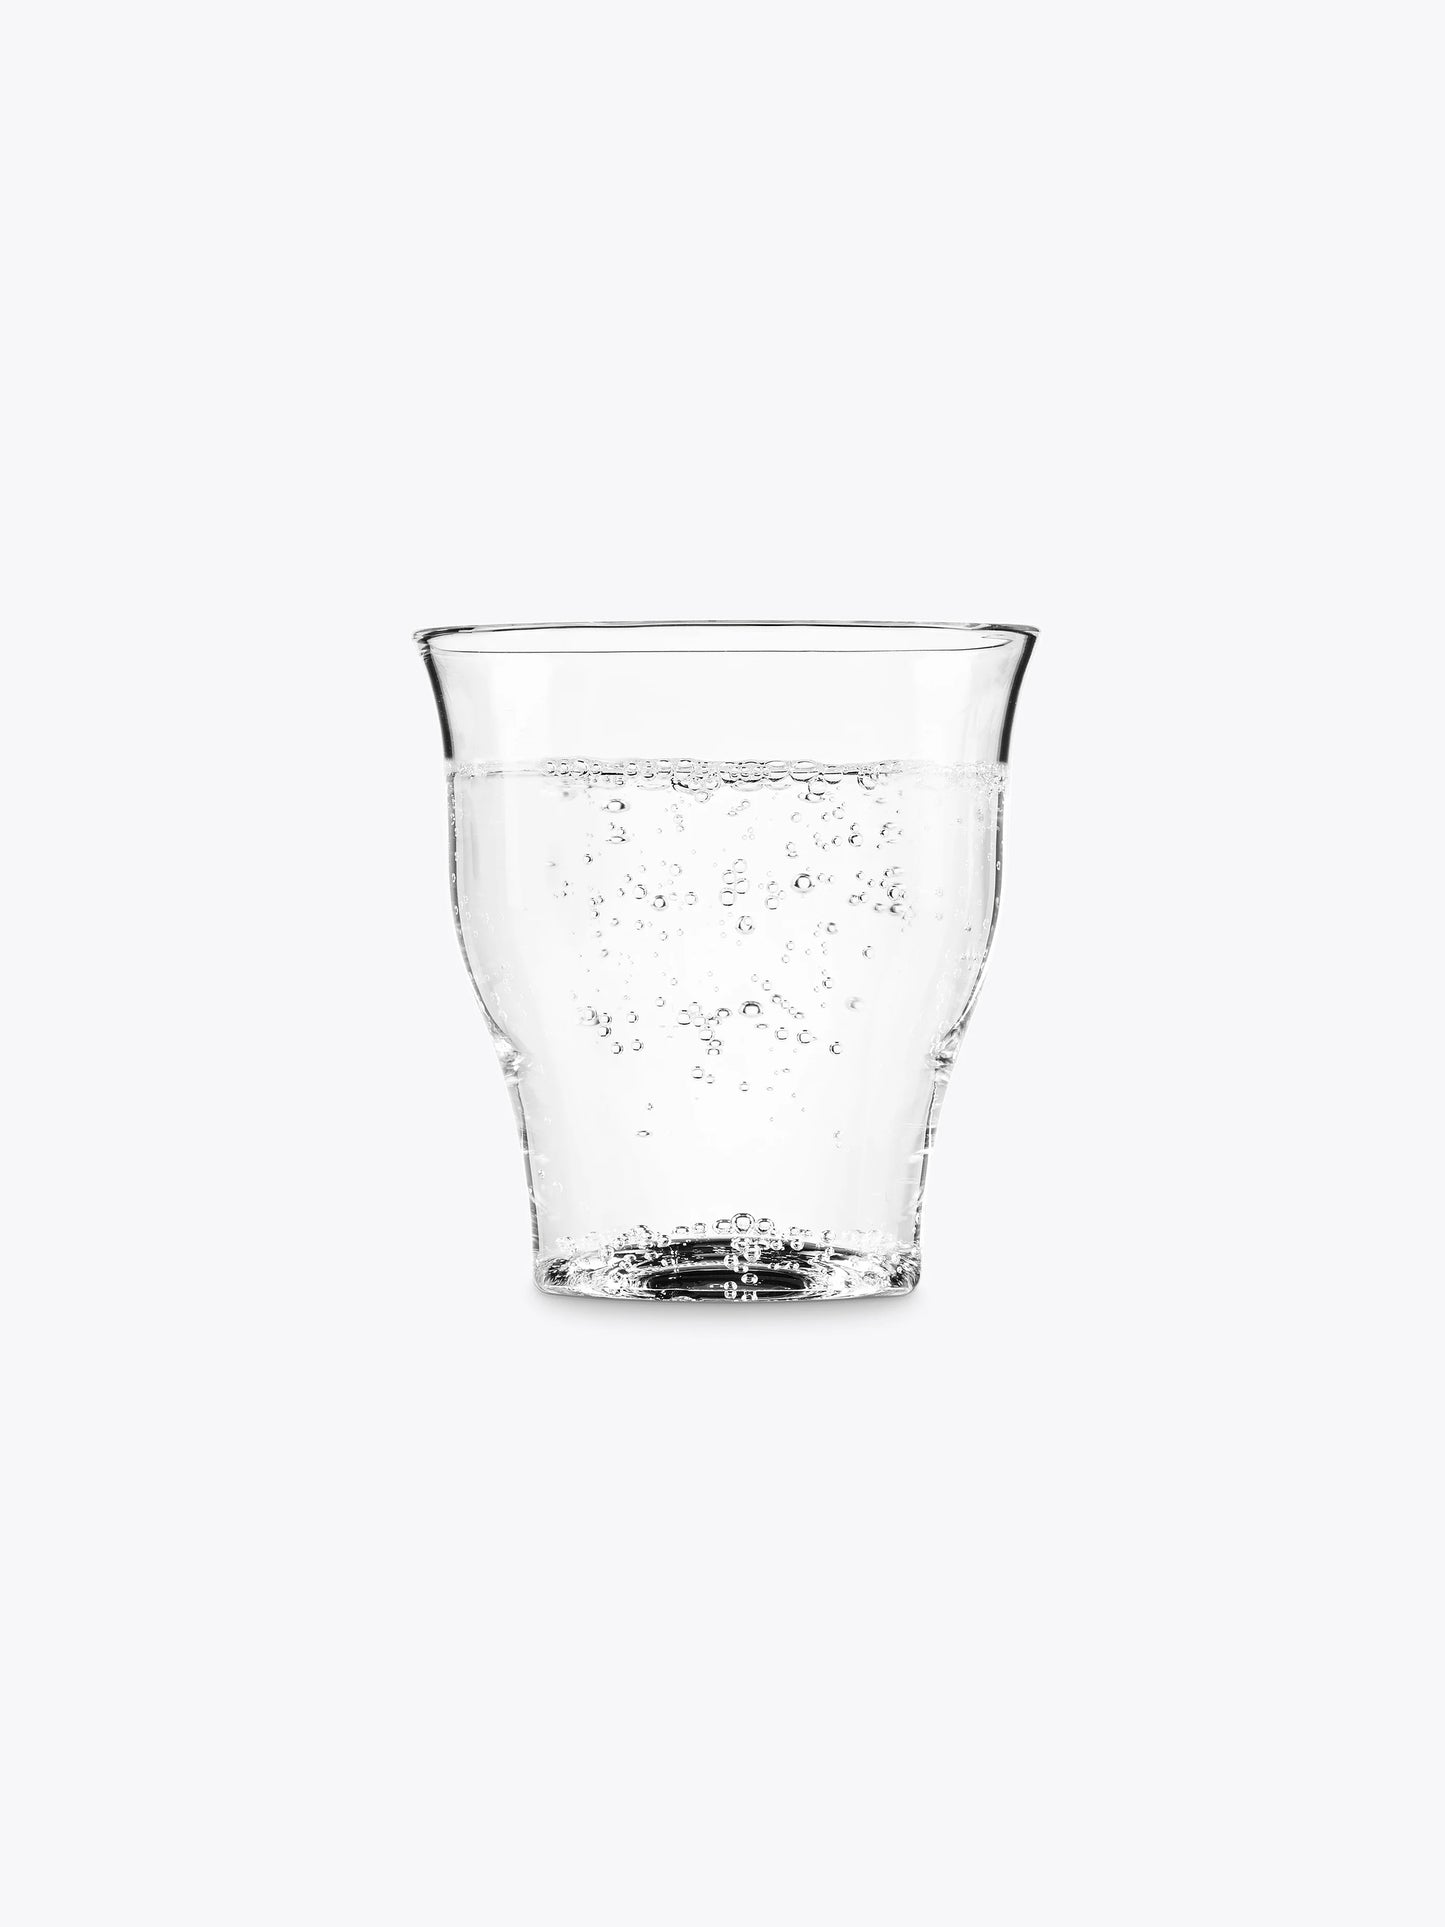 NYX Drinking Glass, Set of 2 Pieces